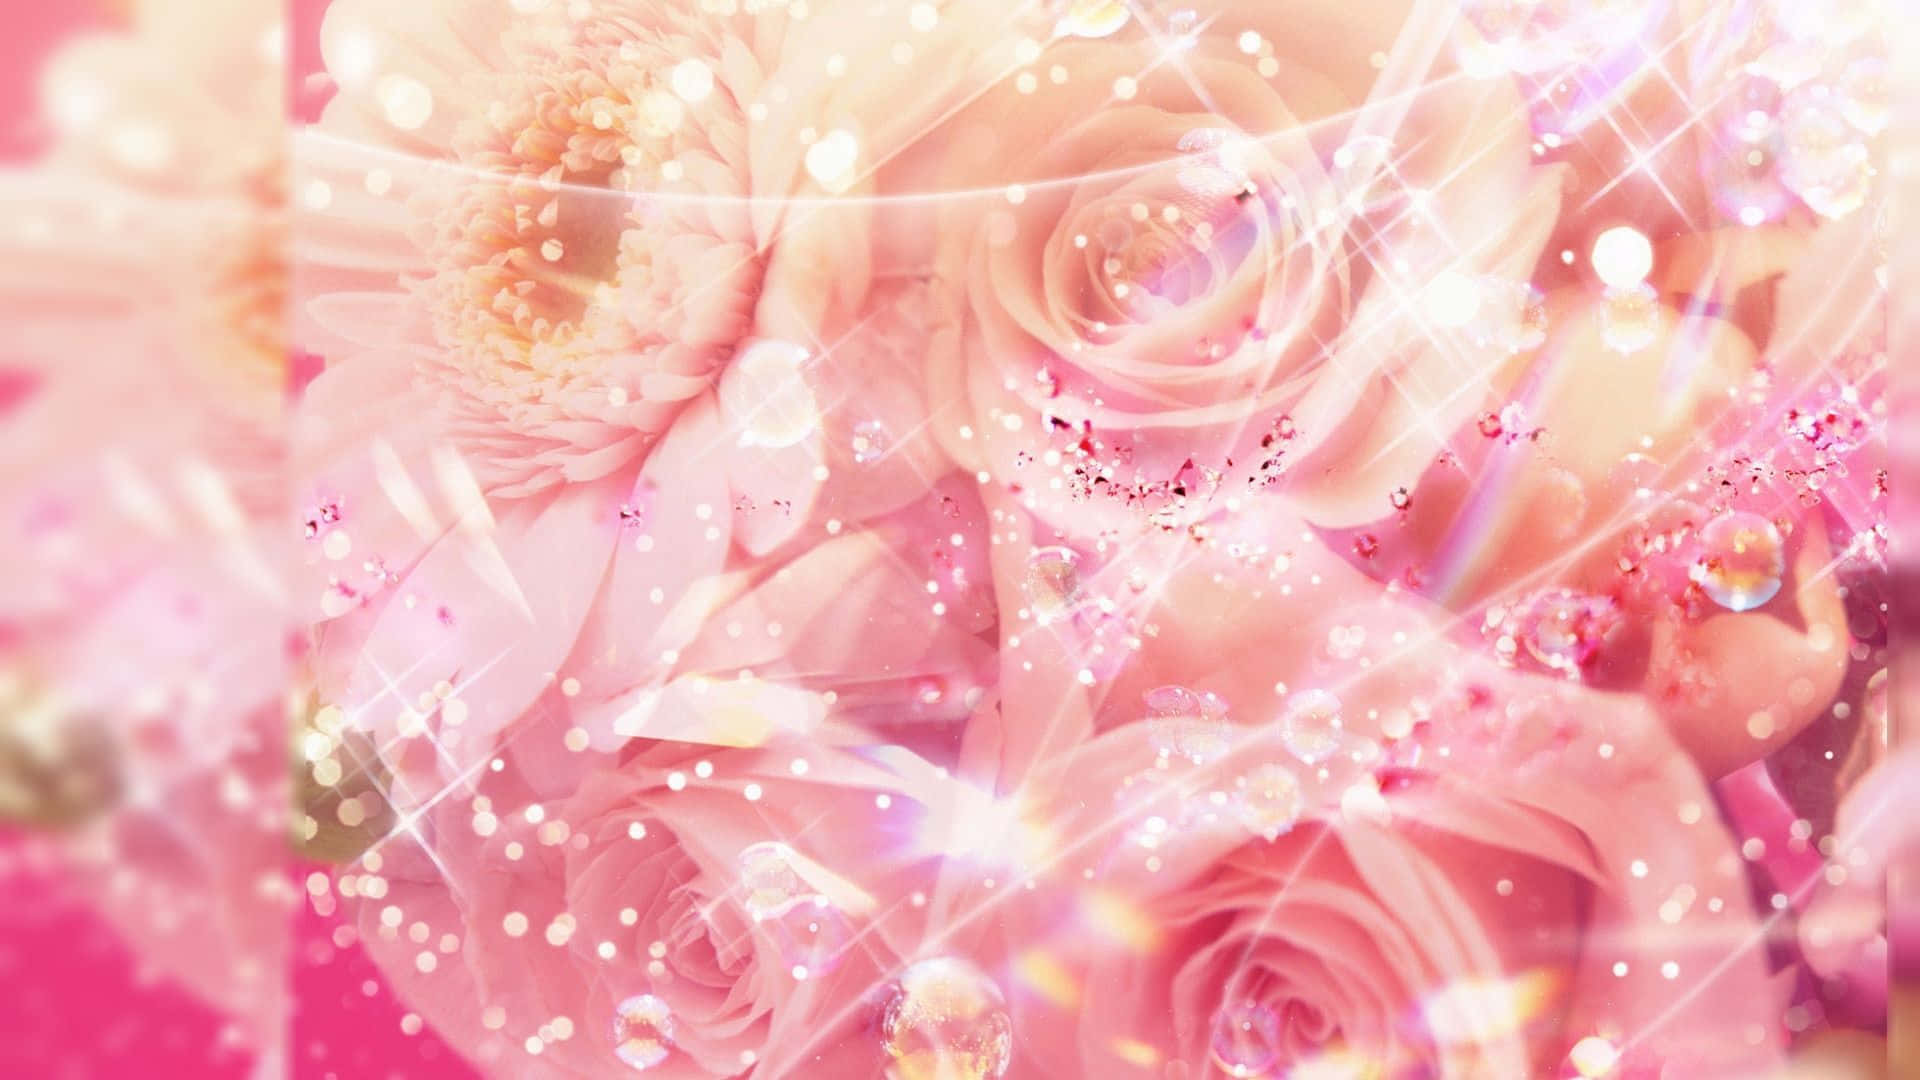 “Radiant Pink Rose: A Symbol of New Beginnings”